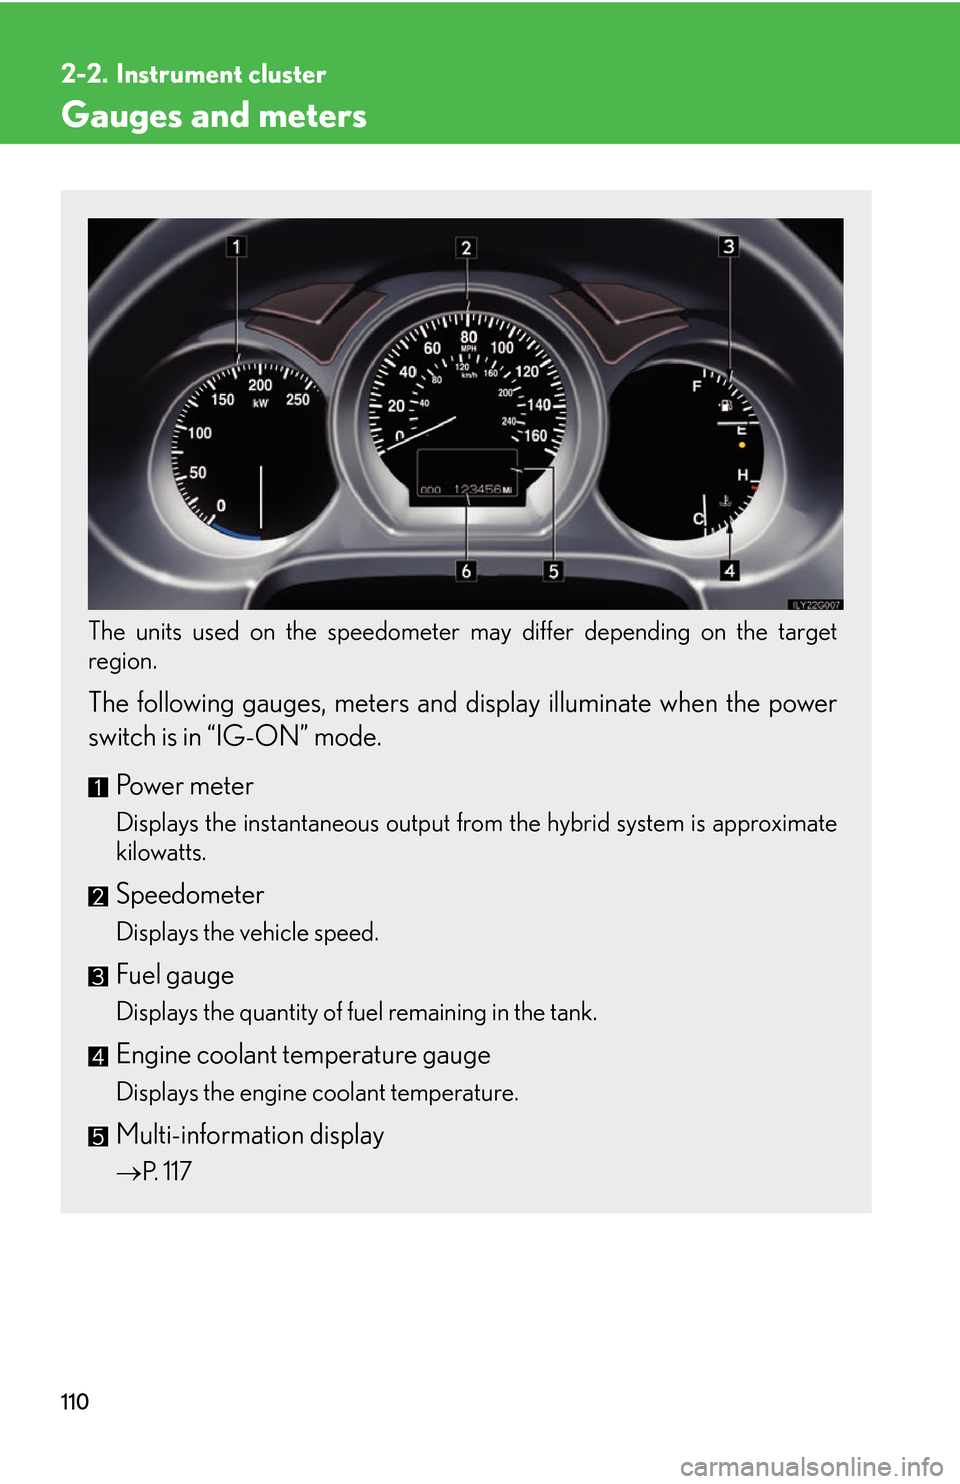 Lexus GS450h 2007  Instrument cluster / LEXUS 2007 GS450H THROUGH JUNE 2006 PROD. OWNERS MANUAL (OM30727U) 110
2-2. Instrument cluster
Gauges and meters
The units used on the speedometer may differ depending on the target 
region.
 
The following gauges, meters and display illuminate when the power 
switch